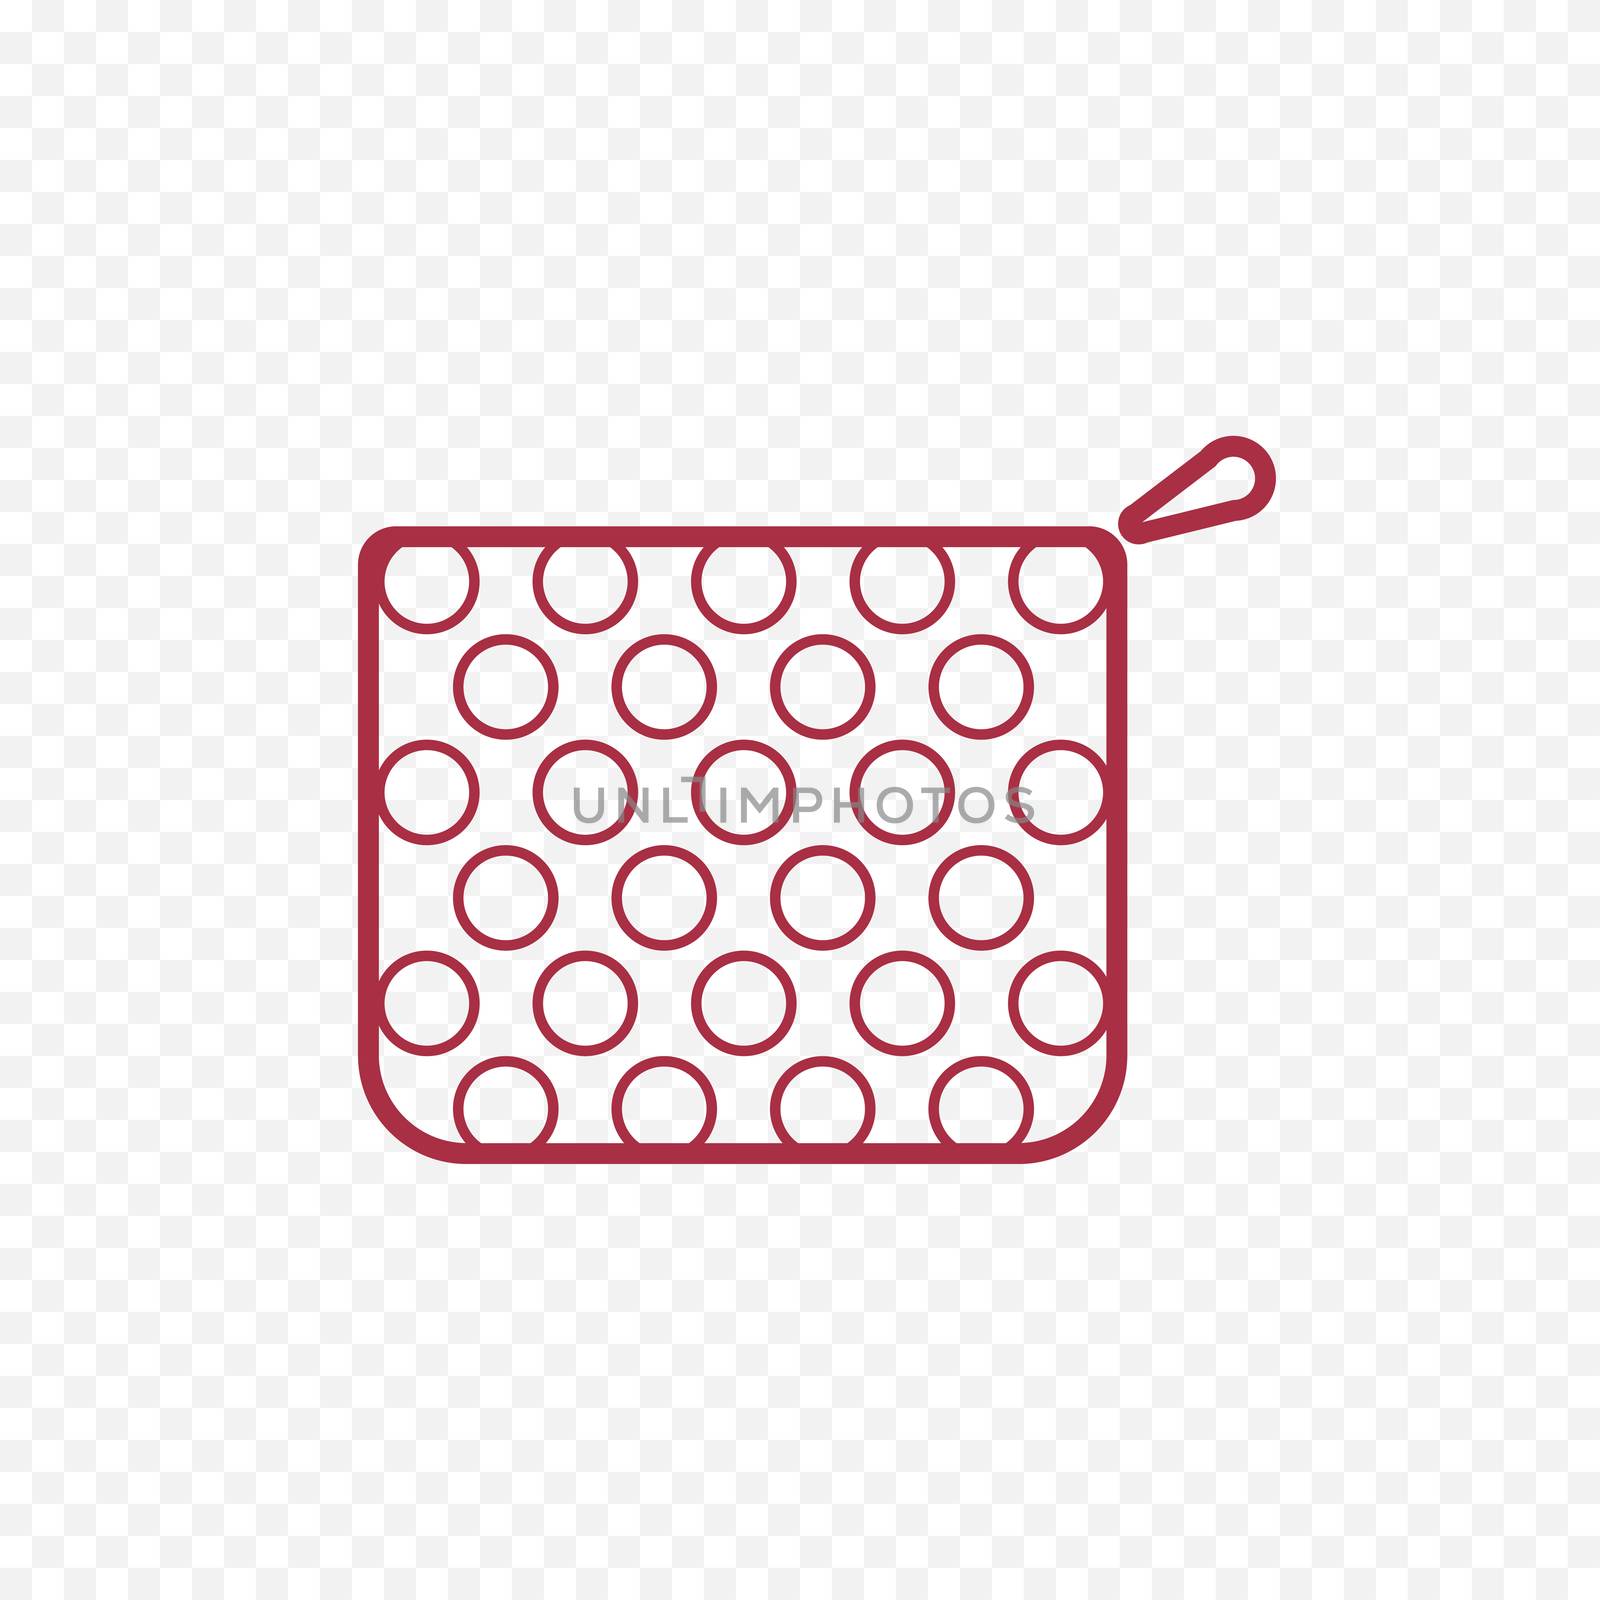 Cosmetic bag thin line icon. Make up bag icon illustration isolated outline.